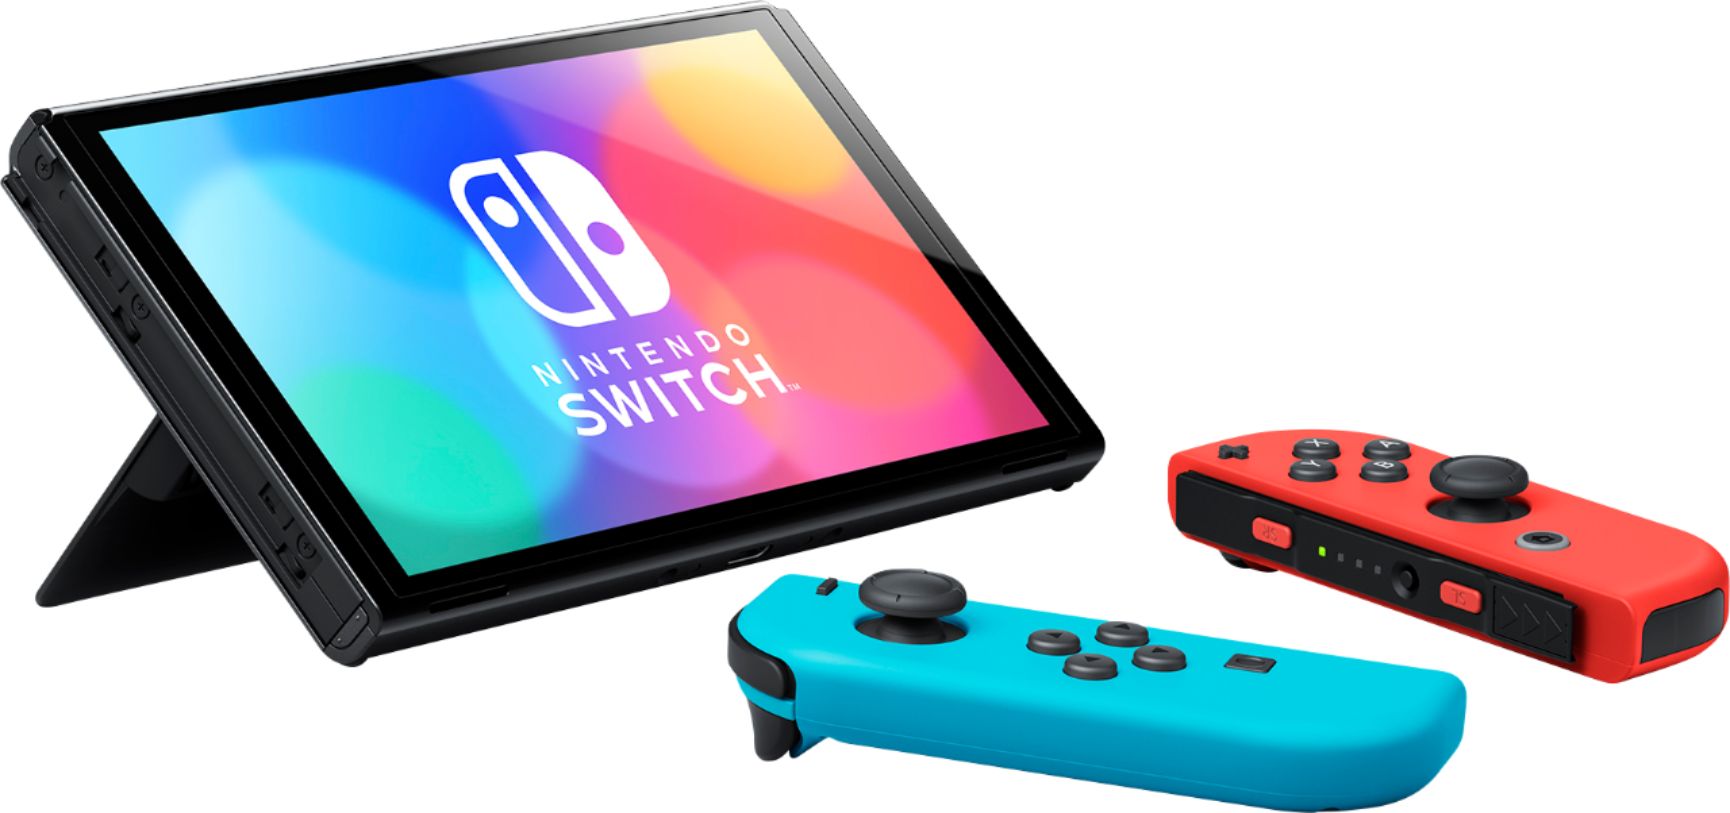 2021 New Nintendo Switch OLED Model Neon Red & Blue Joy Con 64GB Console HD Screen & LAN-Port Dock with Animal Crossing: New Horizons And Mytrix Joystick Caps & Screen Protector